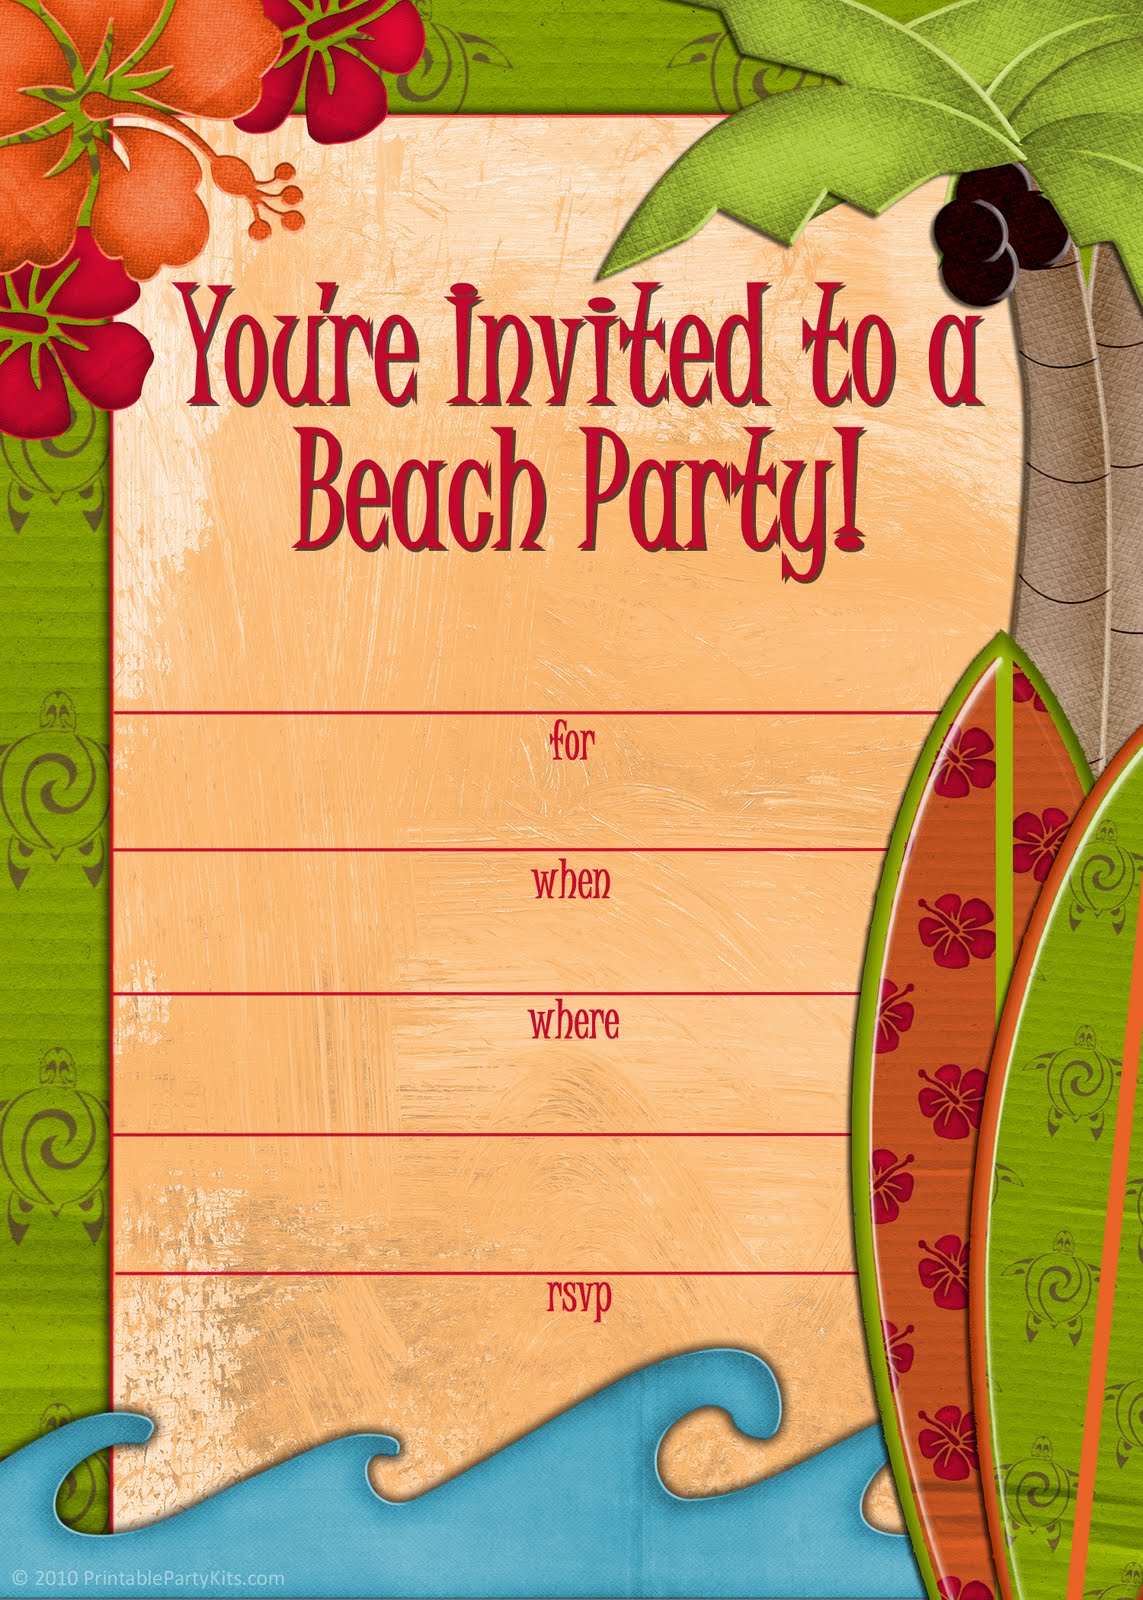 Free Printable Party Invitations Free Invites For A Summer Beach Party